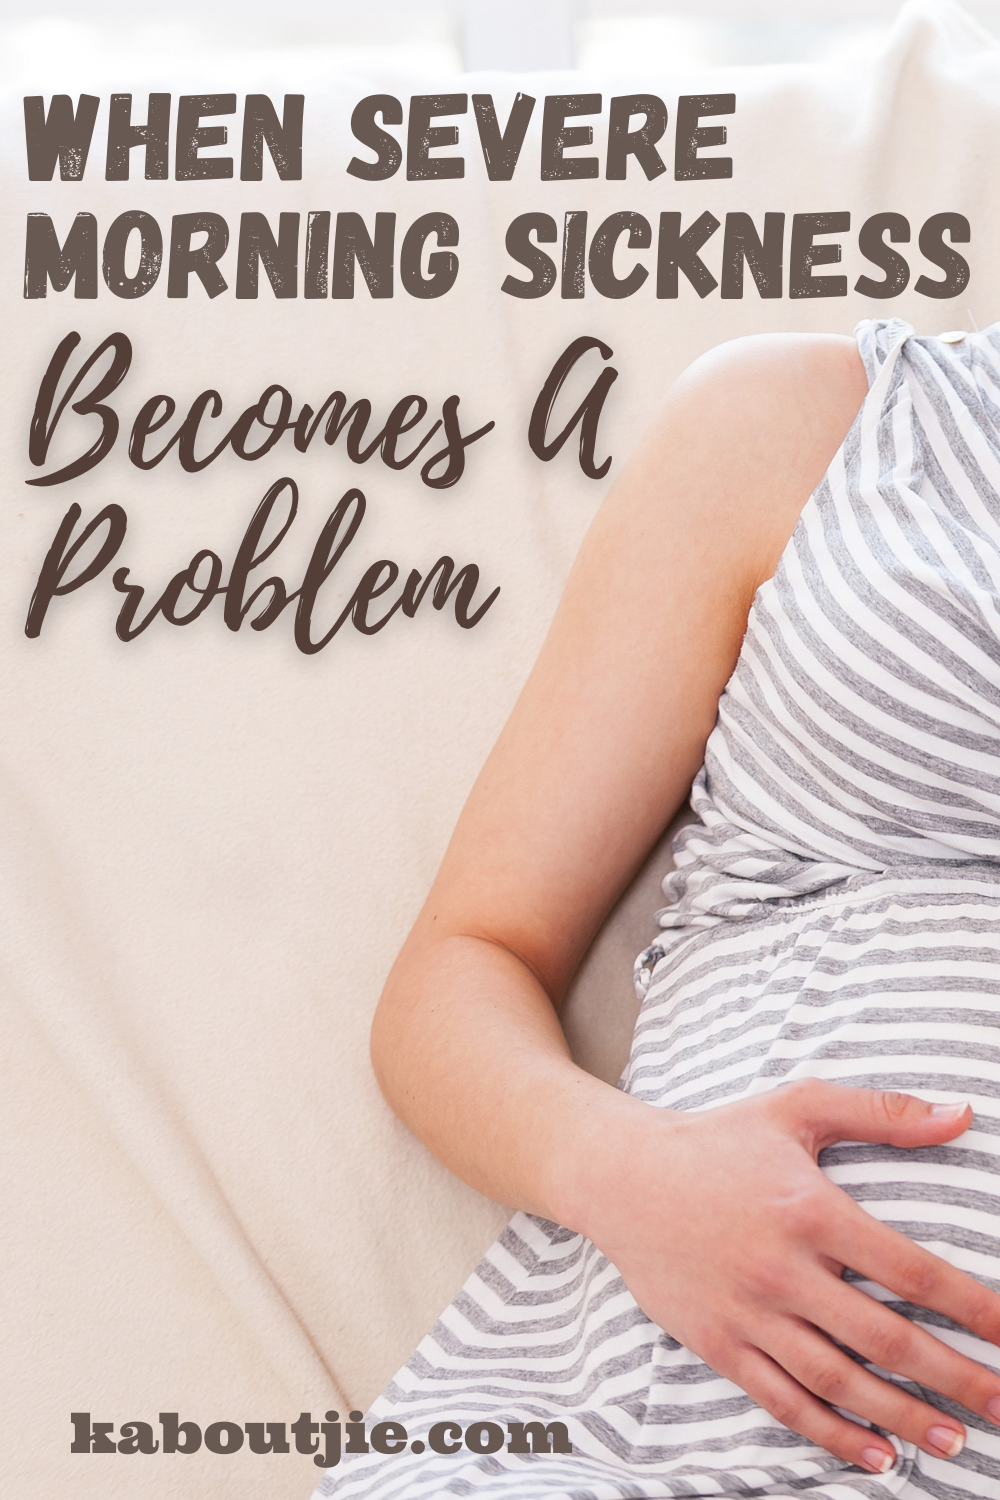 does travel make morning sickness worse